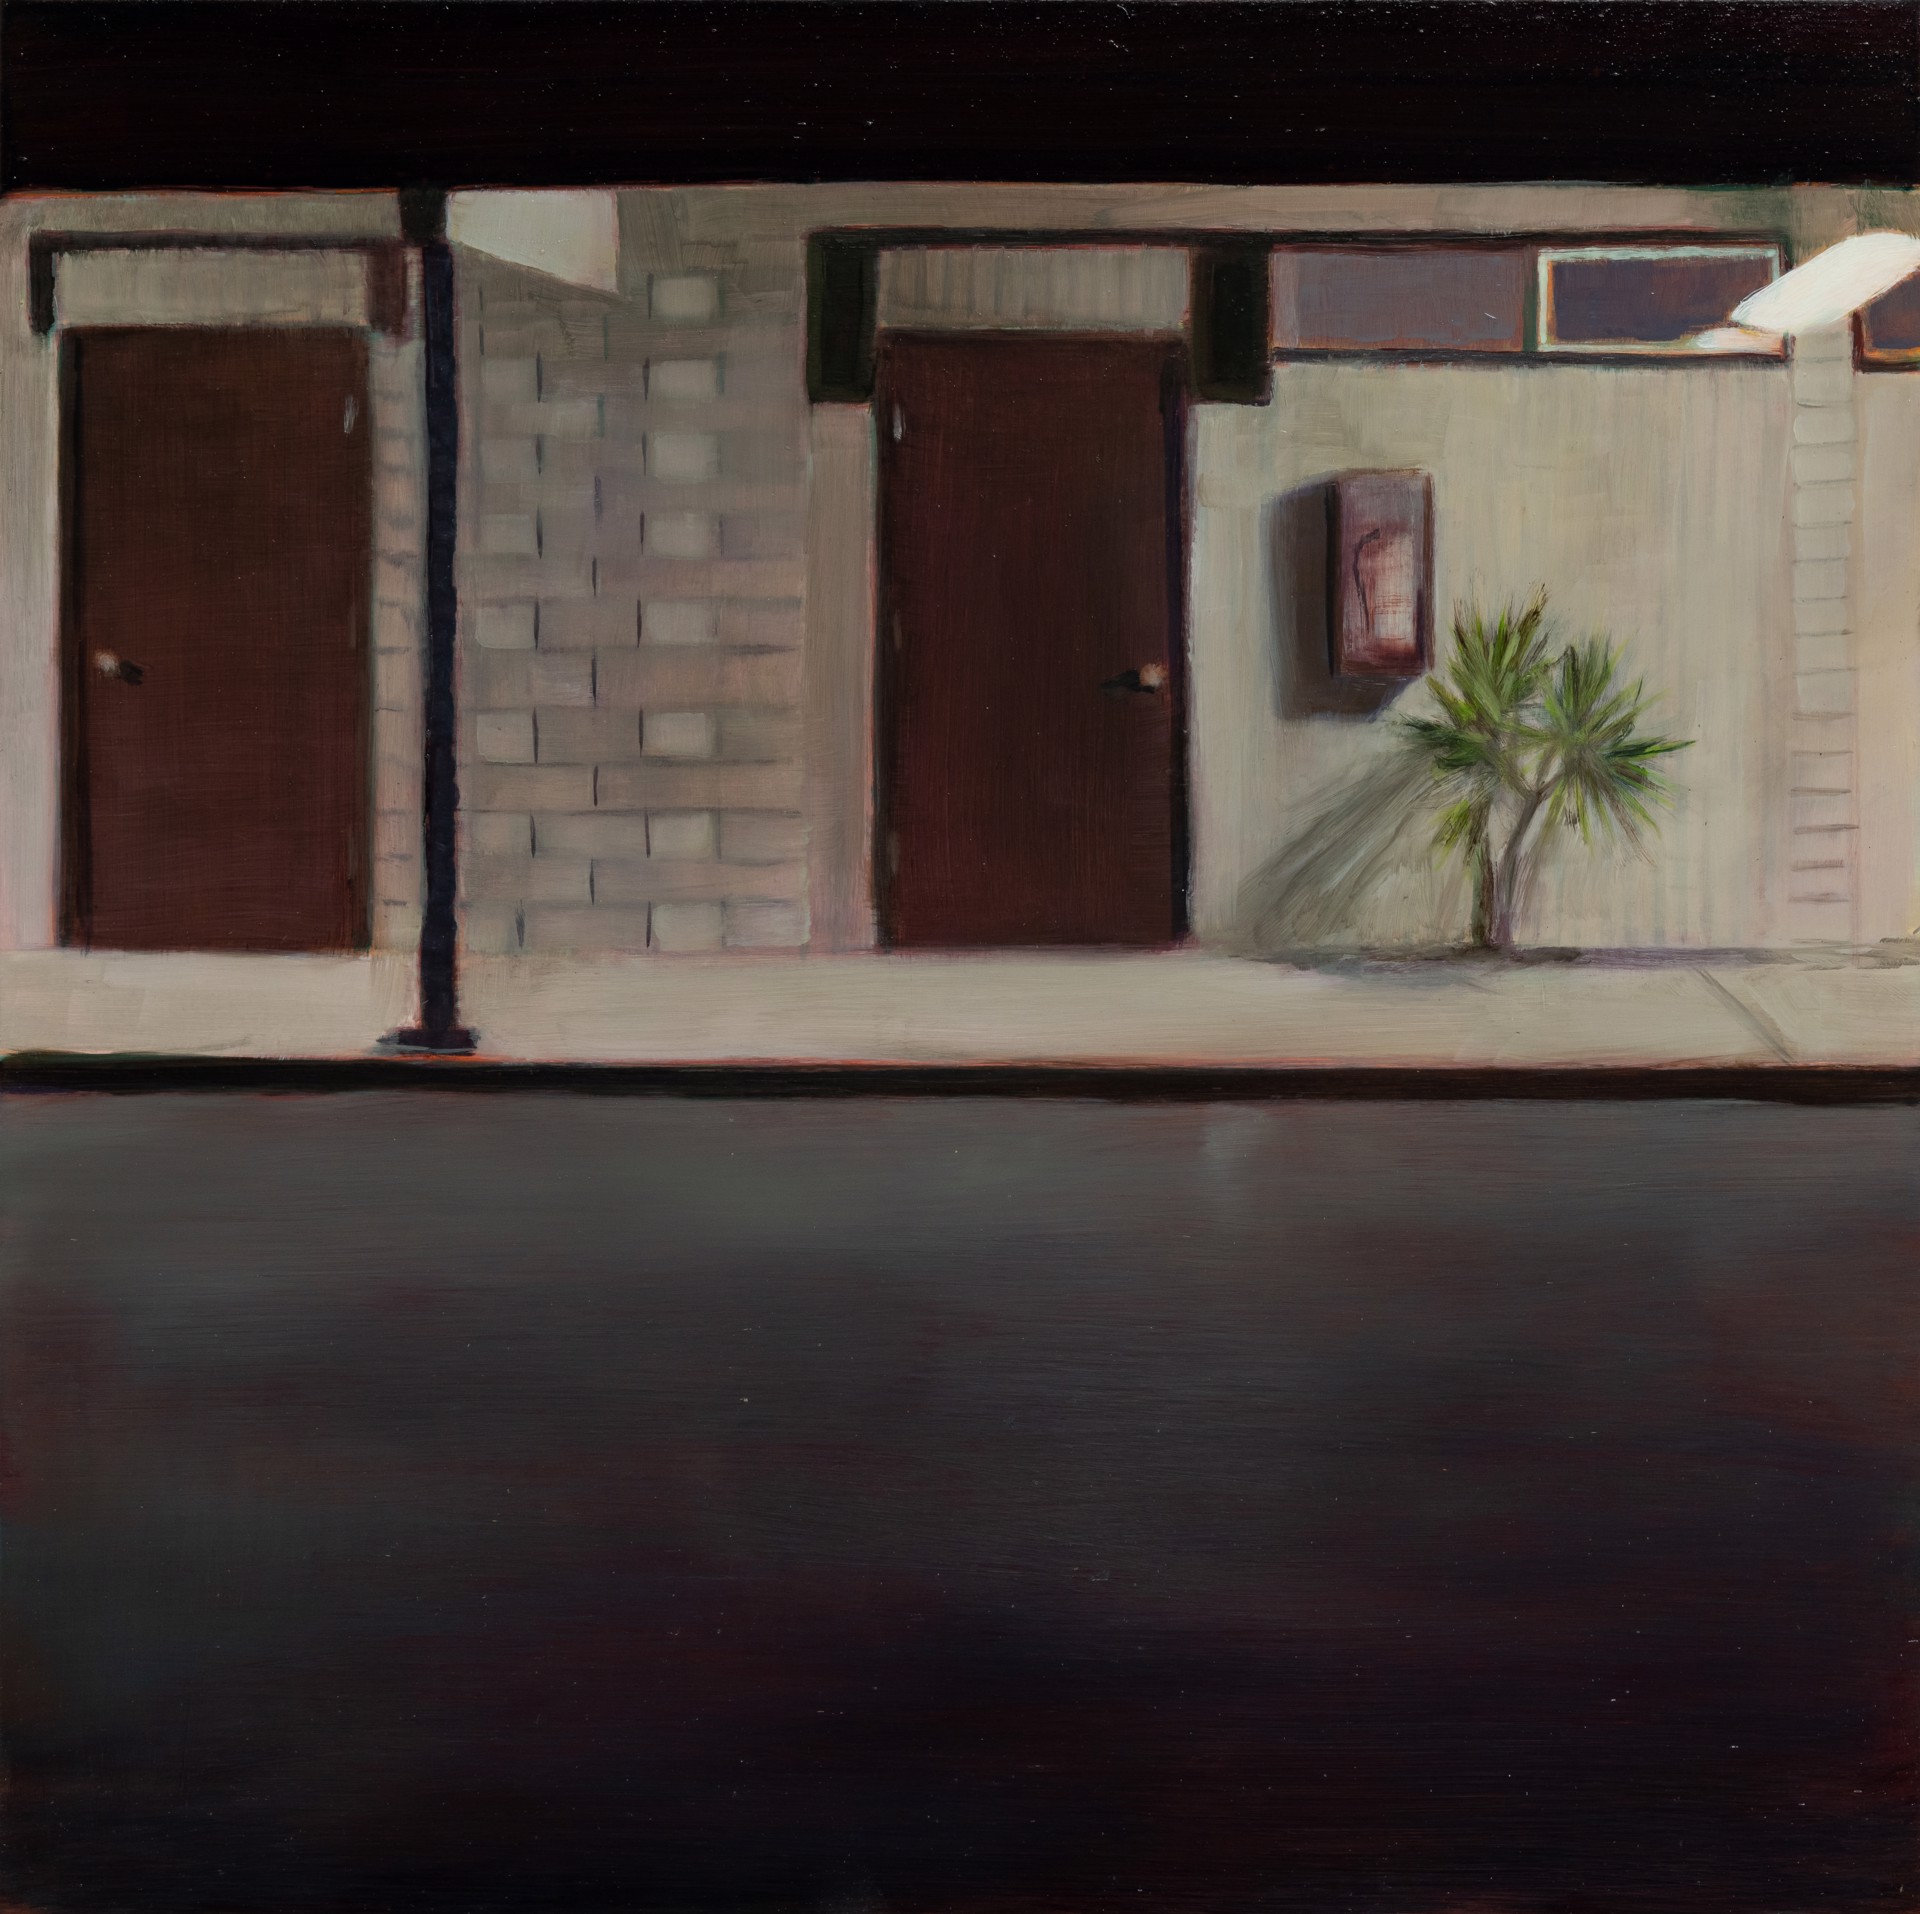 Nocturne (Downy Motel) by Keith Crowley